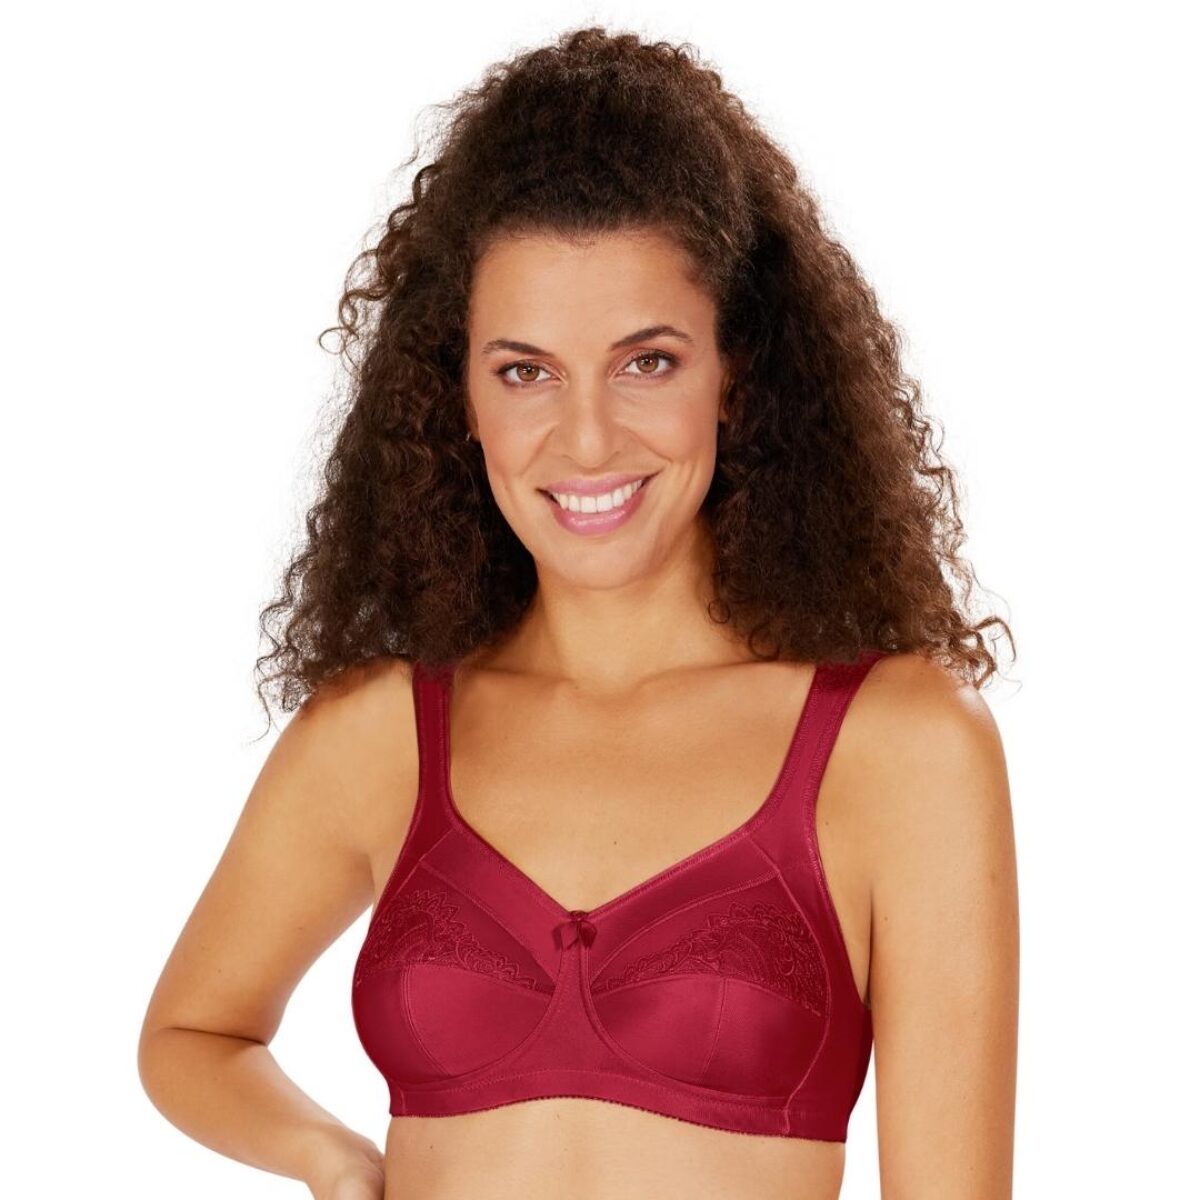 Amoena Ruth Wire-Free Bra, Soft Cup, Size 44A, Nude Ref